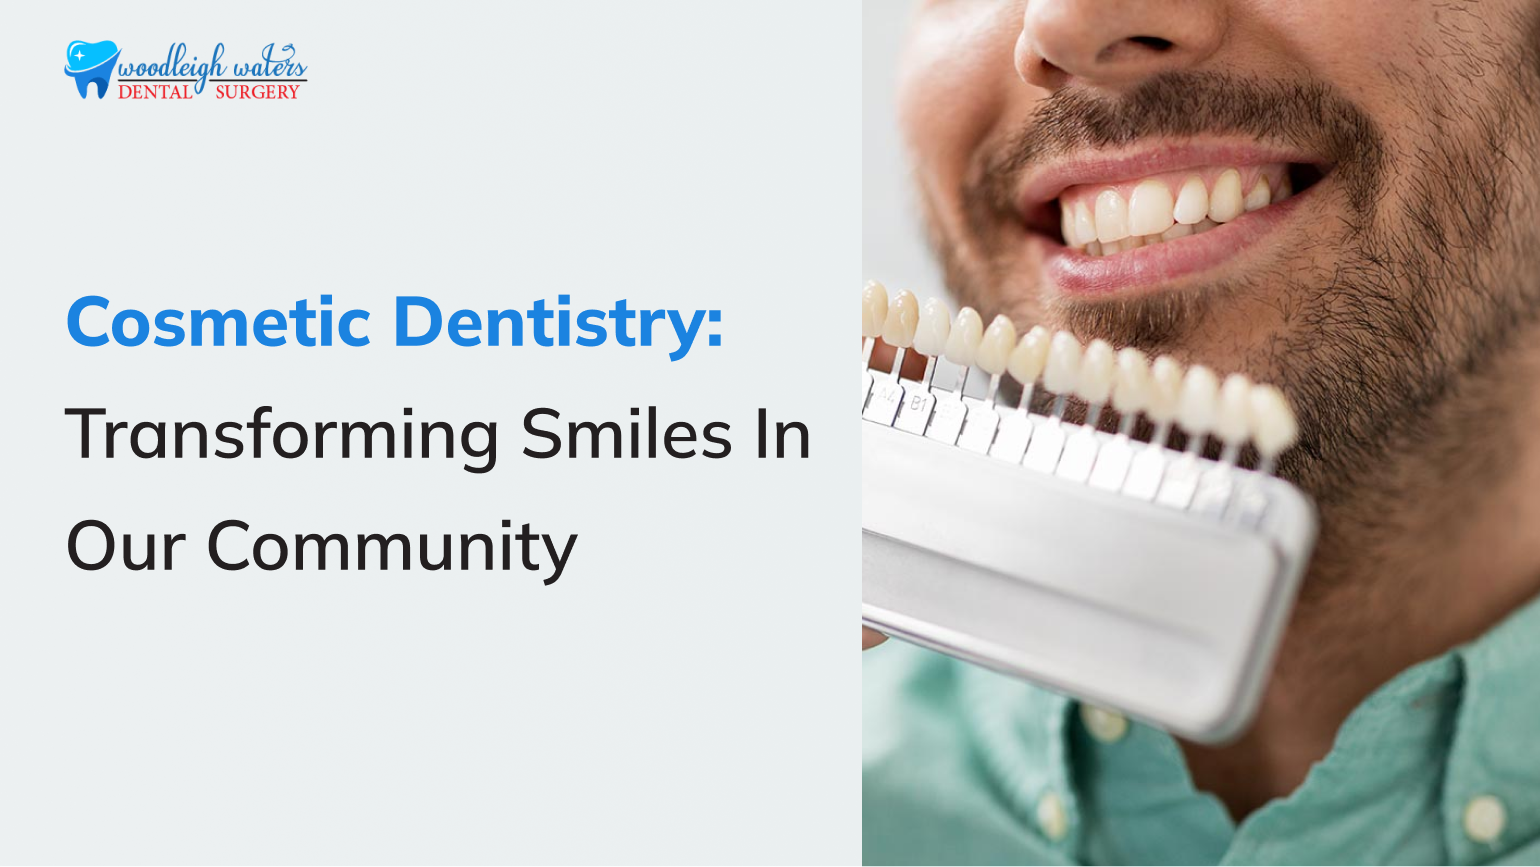 Cosmetic Dentistry: Transforming Smiles in Our Community